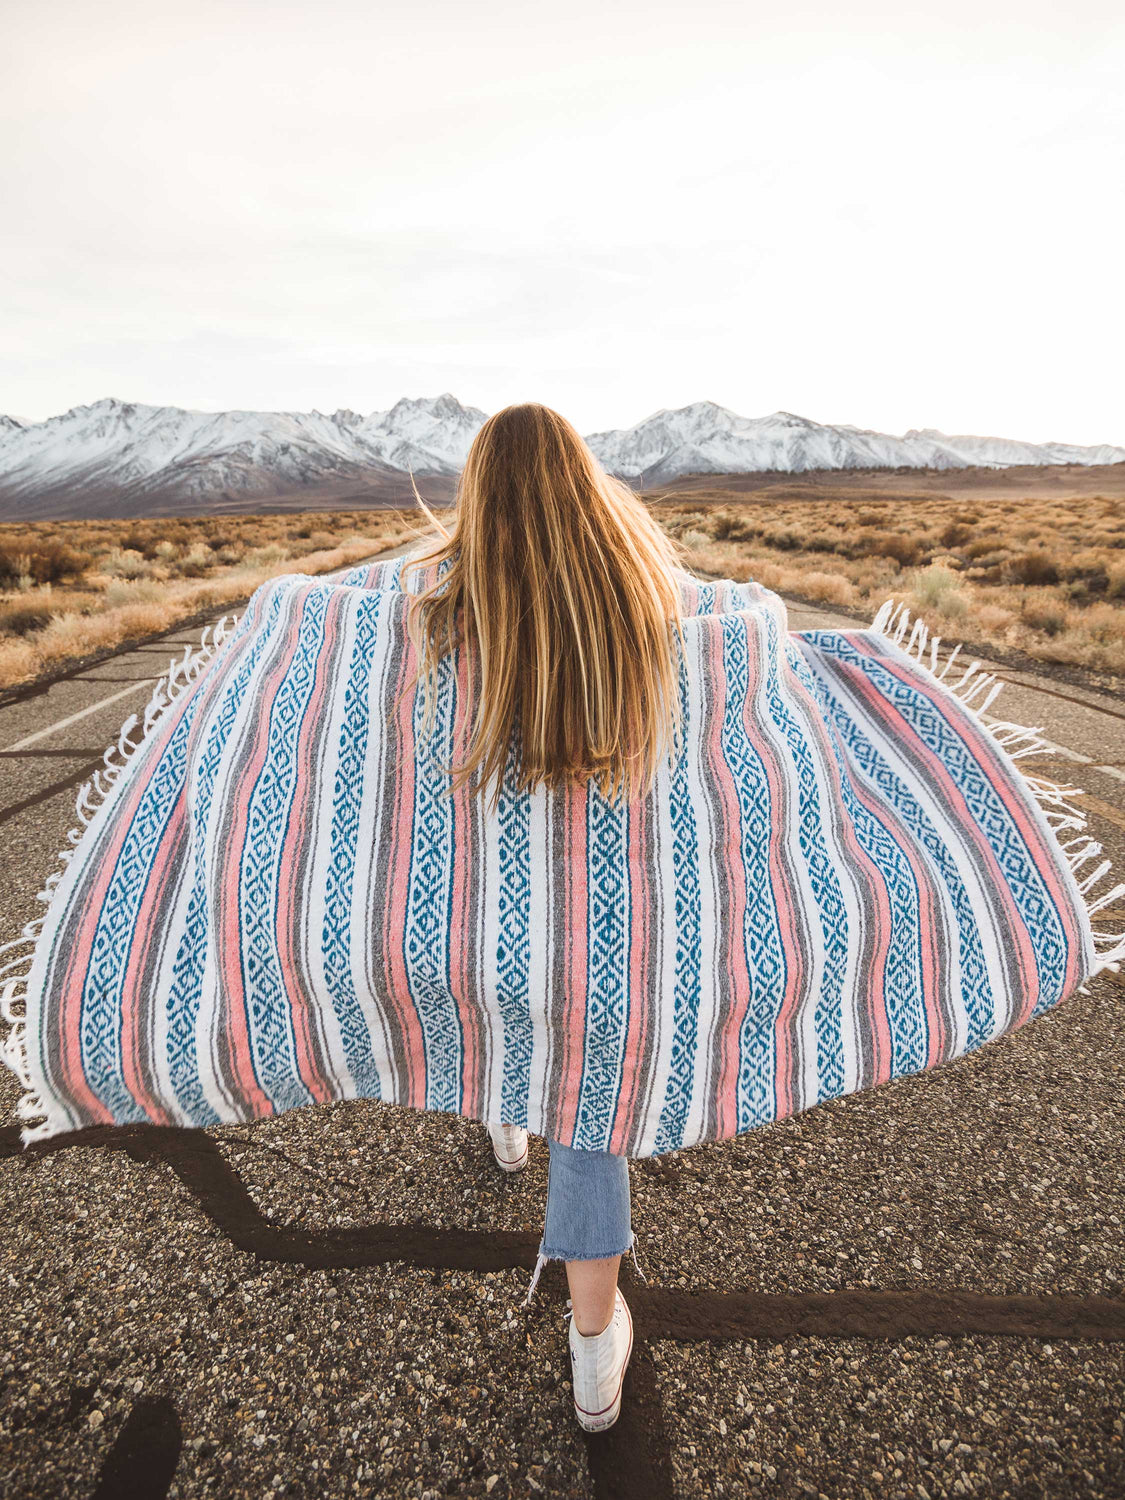 A woman walking on a road in a desert with a traditional blue, pink, and gray Mexican blanket wrapped around her. 